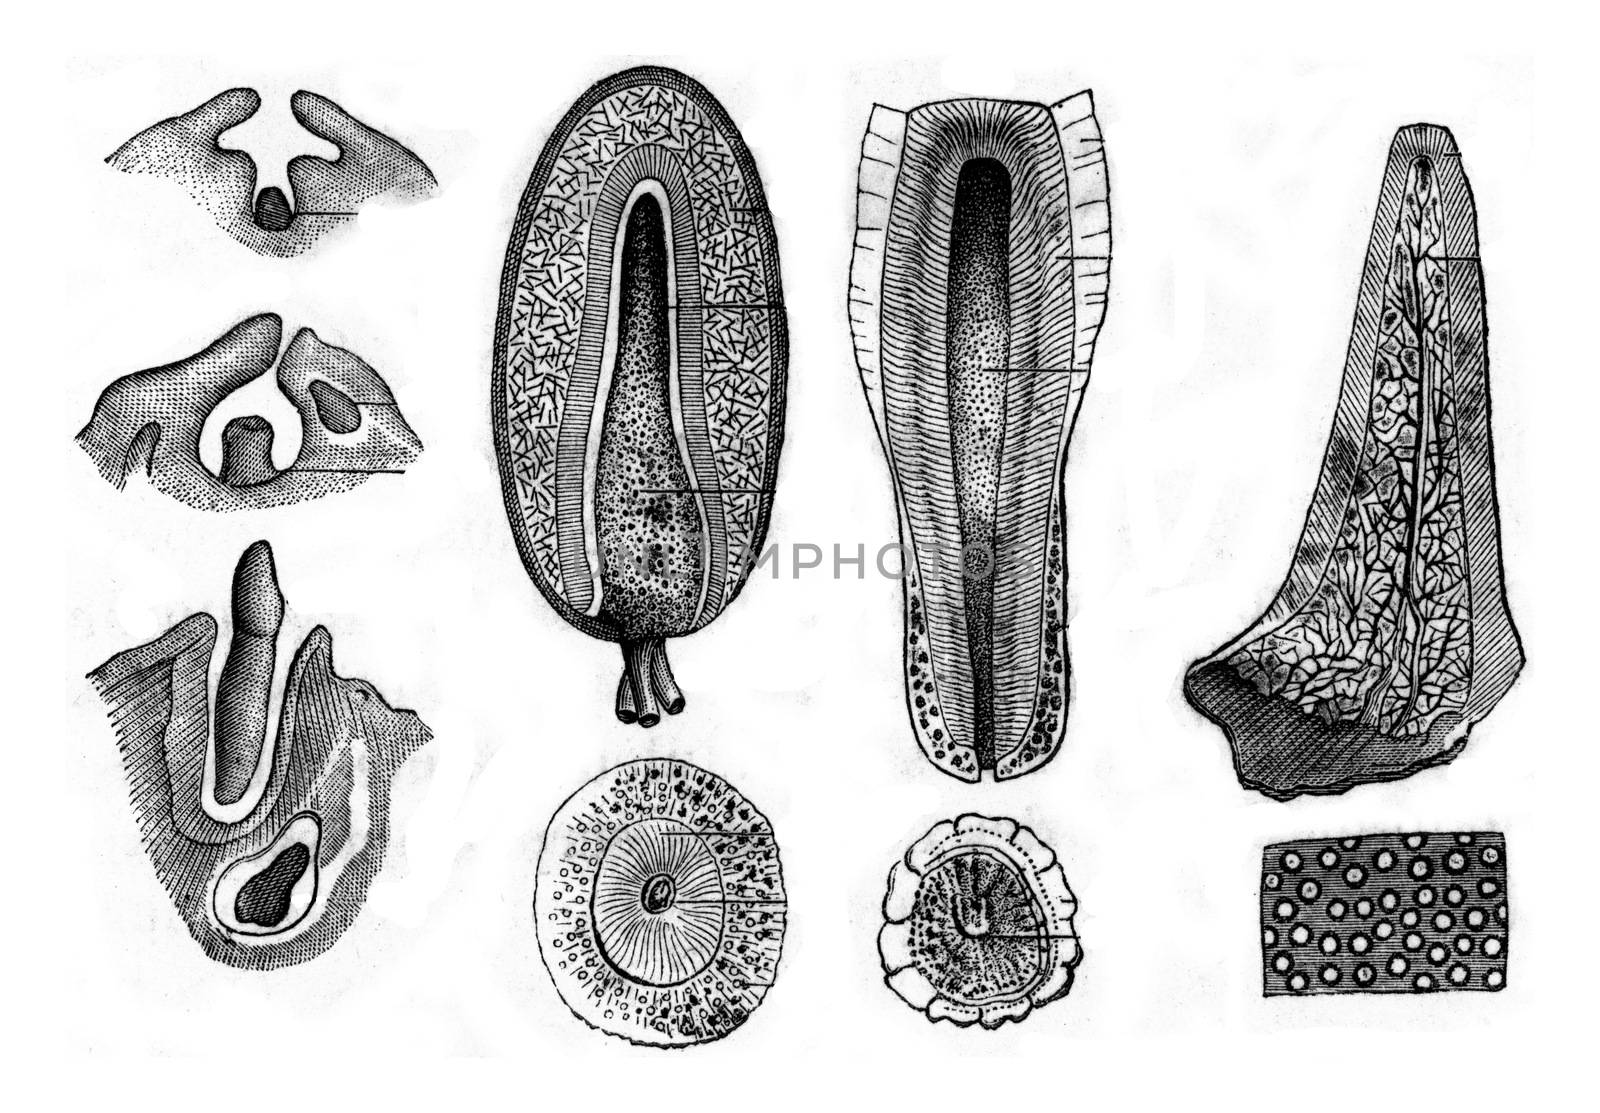 Development and structure of teeth, vintage engraved illustration. Zoology Elements from Paul Gervais.
